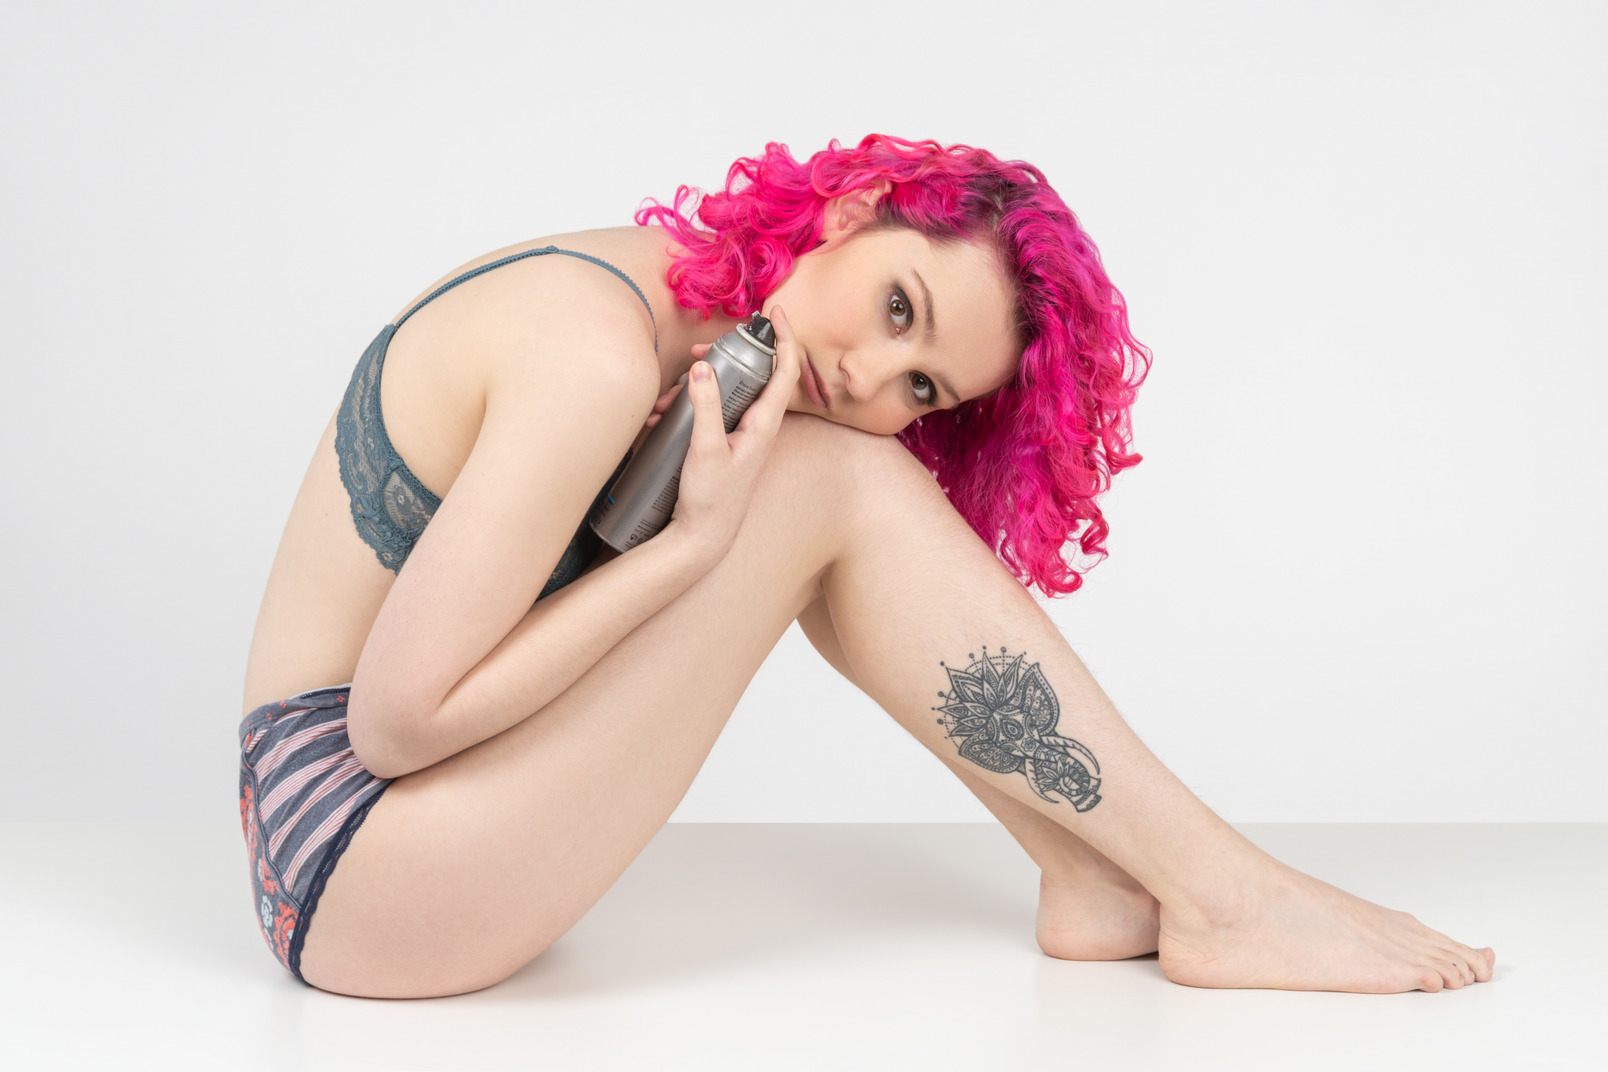 Cute pink haired girl with tattooed leg sitting on the floor with a silver bottle